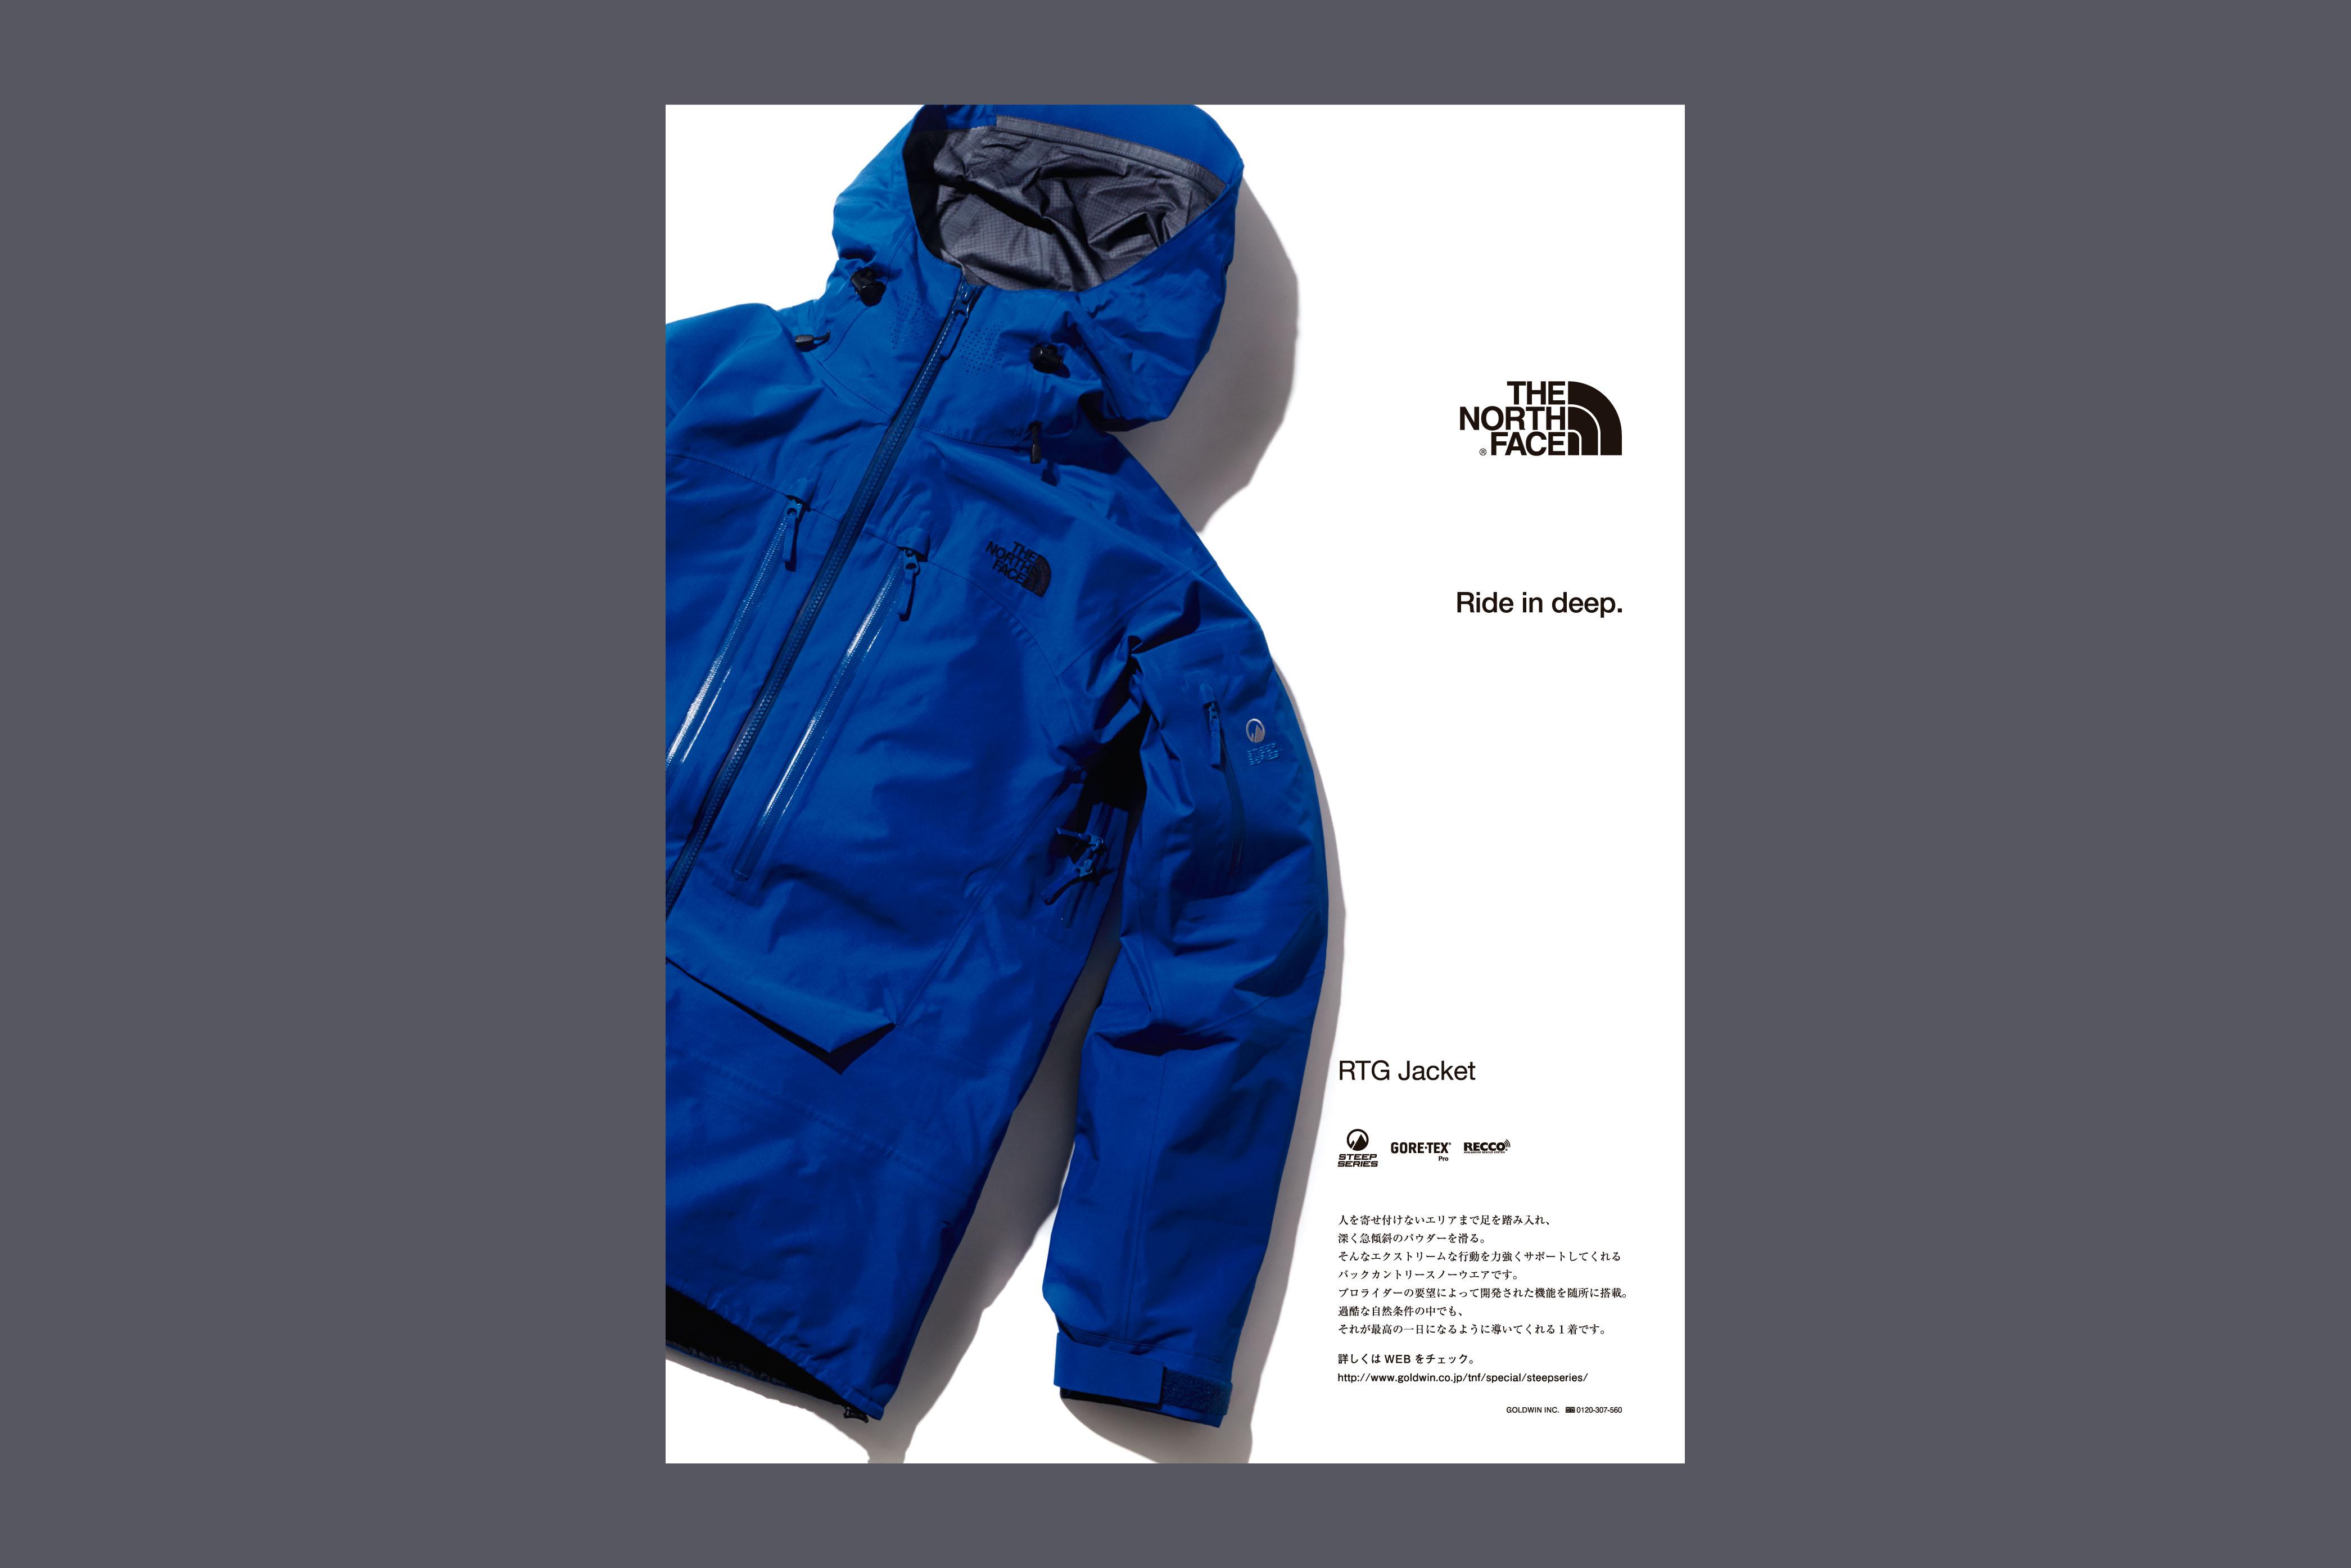 The North Face: Products (Advertisement, 2013) - Kamikene